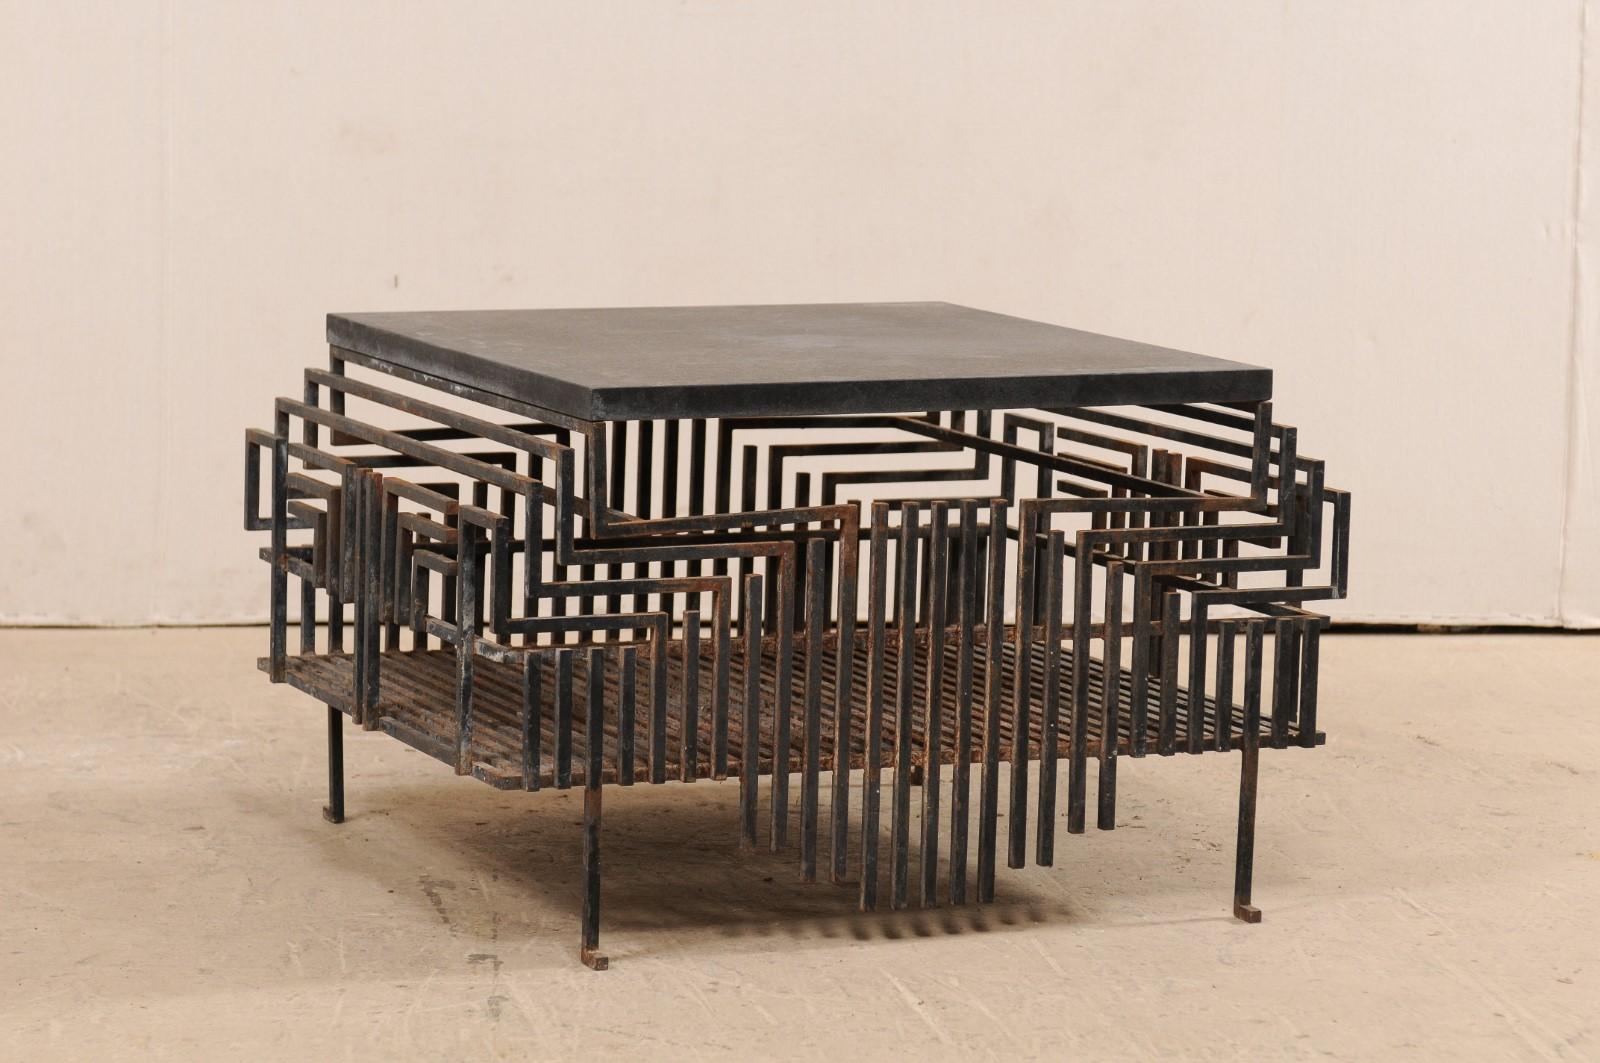 This is a one of a kind coffee table, which has been fashioned from a large-scale French iron fireplace grate (from the early to mid 20th century) and topped with a newer honed granite top. This unique table features a honed granite top which rests